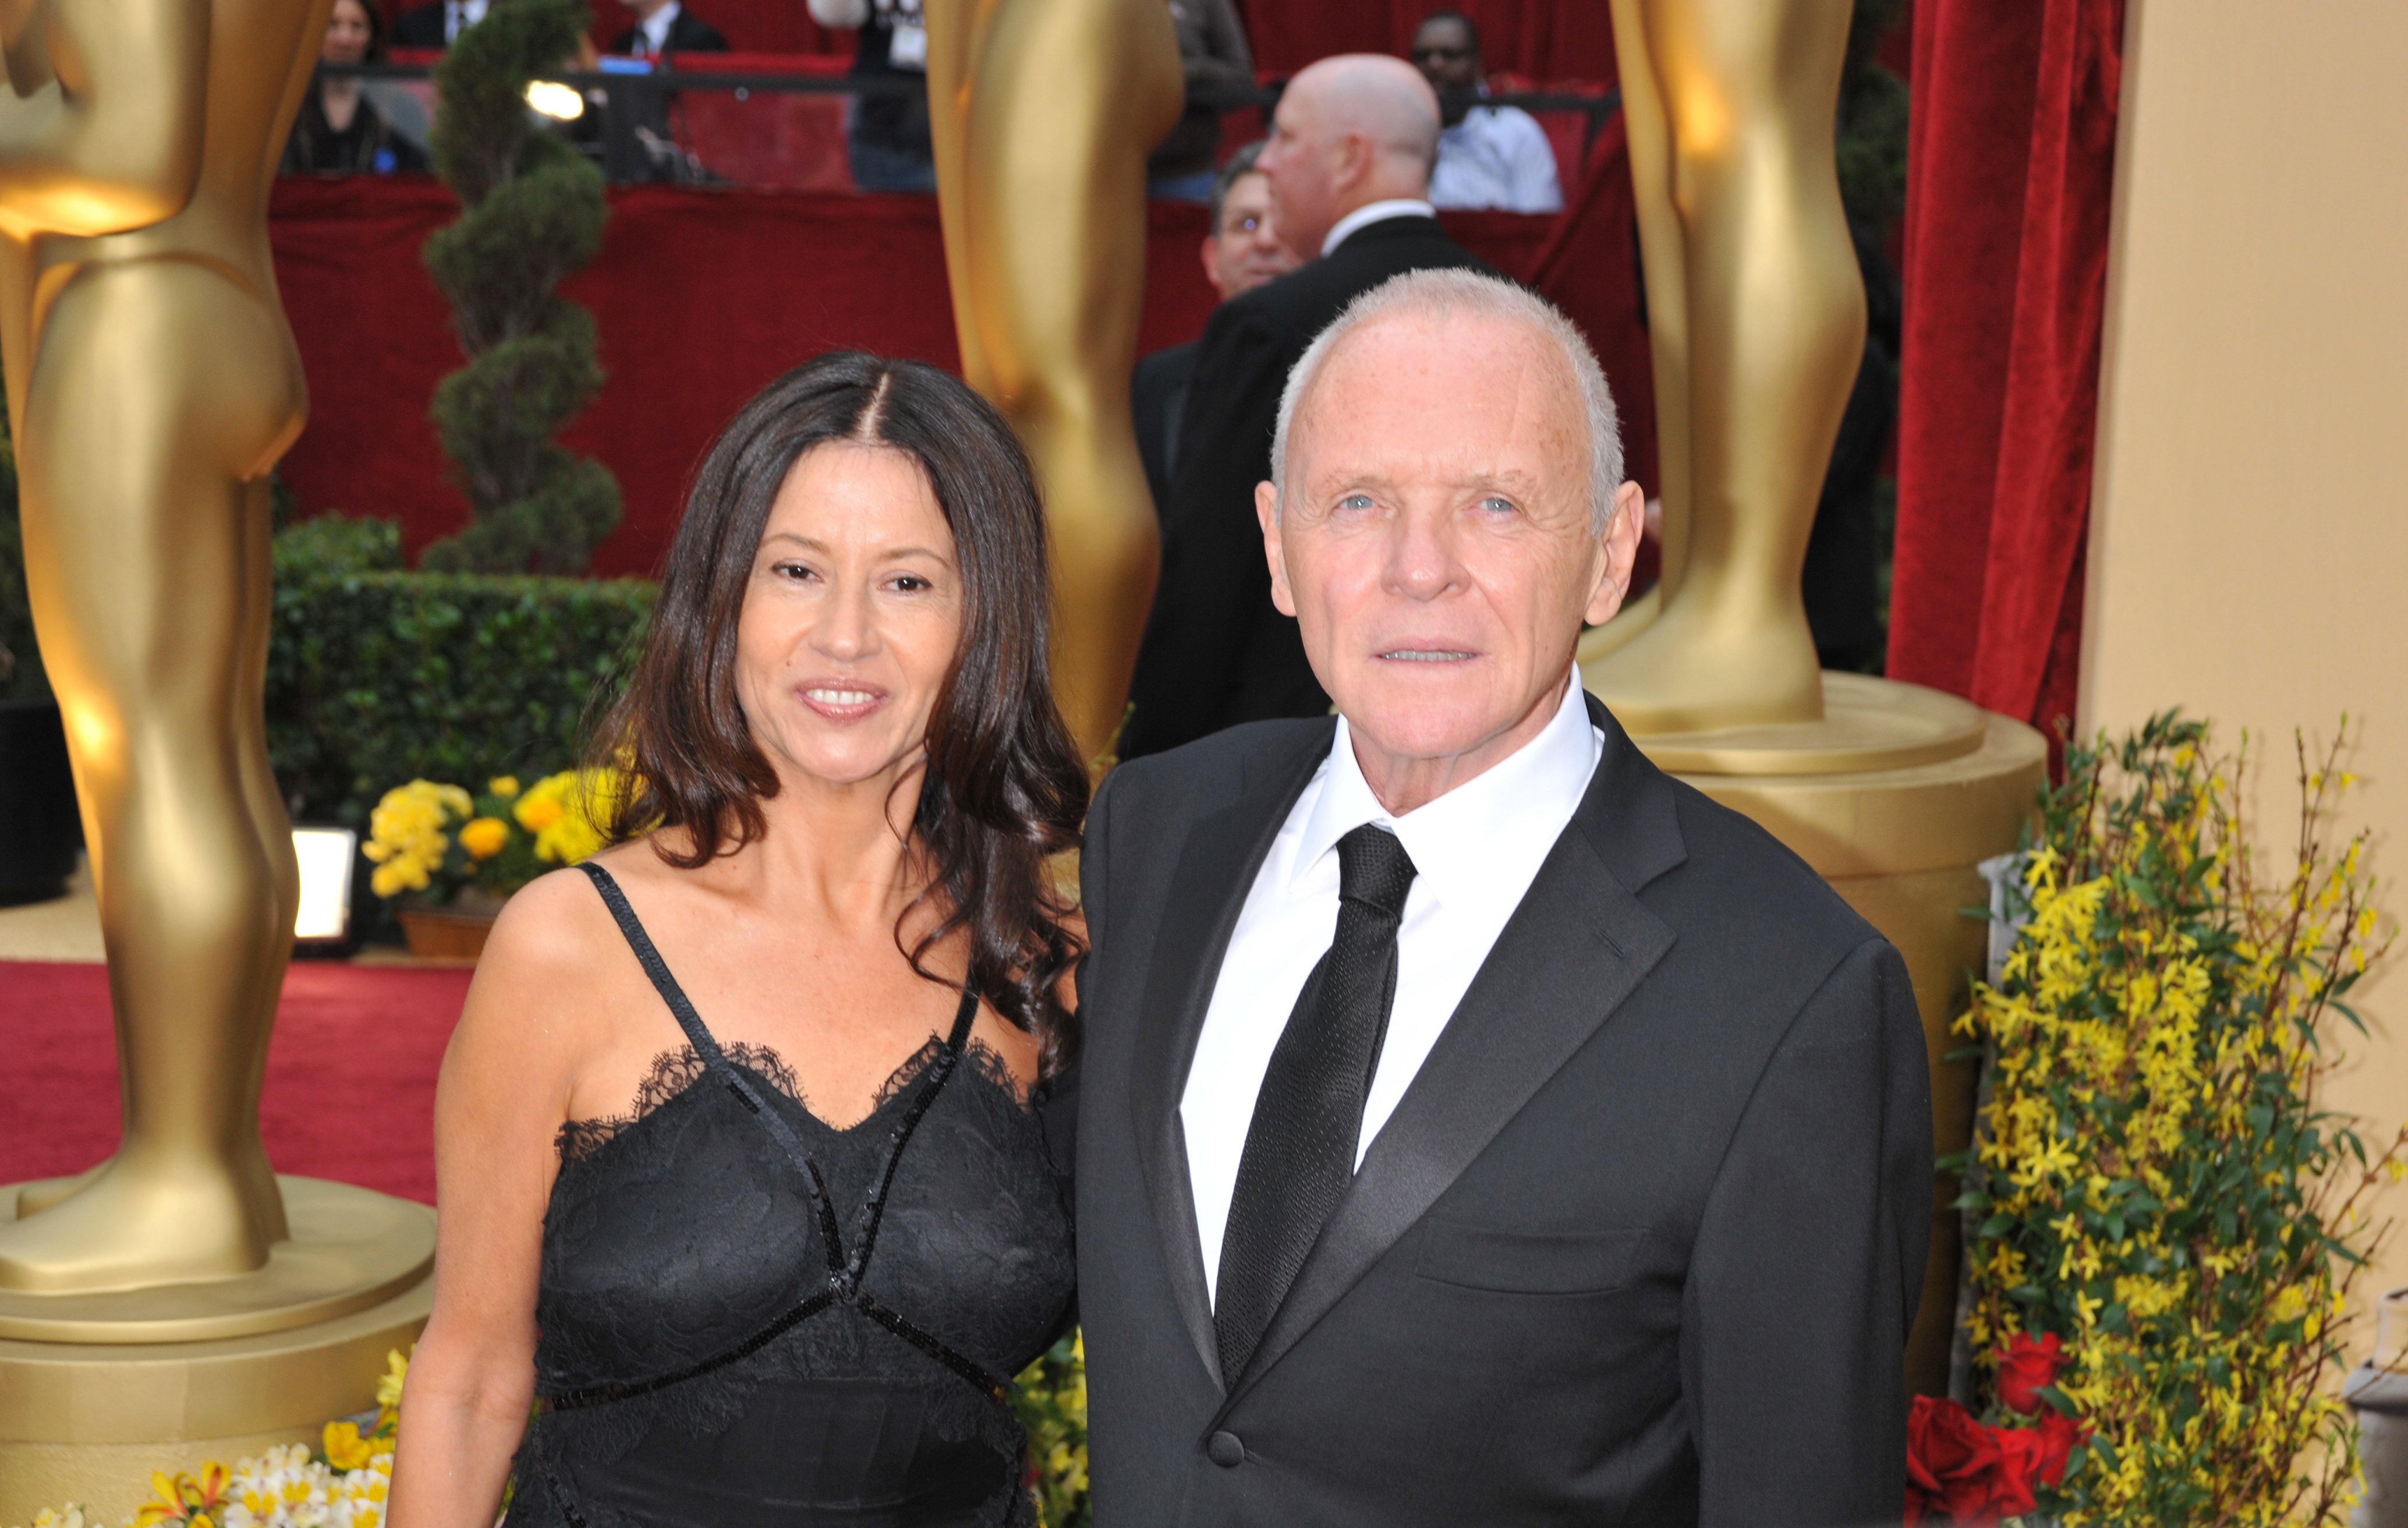 Anthony Hopkins and his wife Stella Arroyave arriving at the 81st Academy Awards at the Kodak Theatre in 2009. / Source: Getty Images